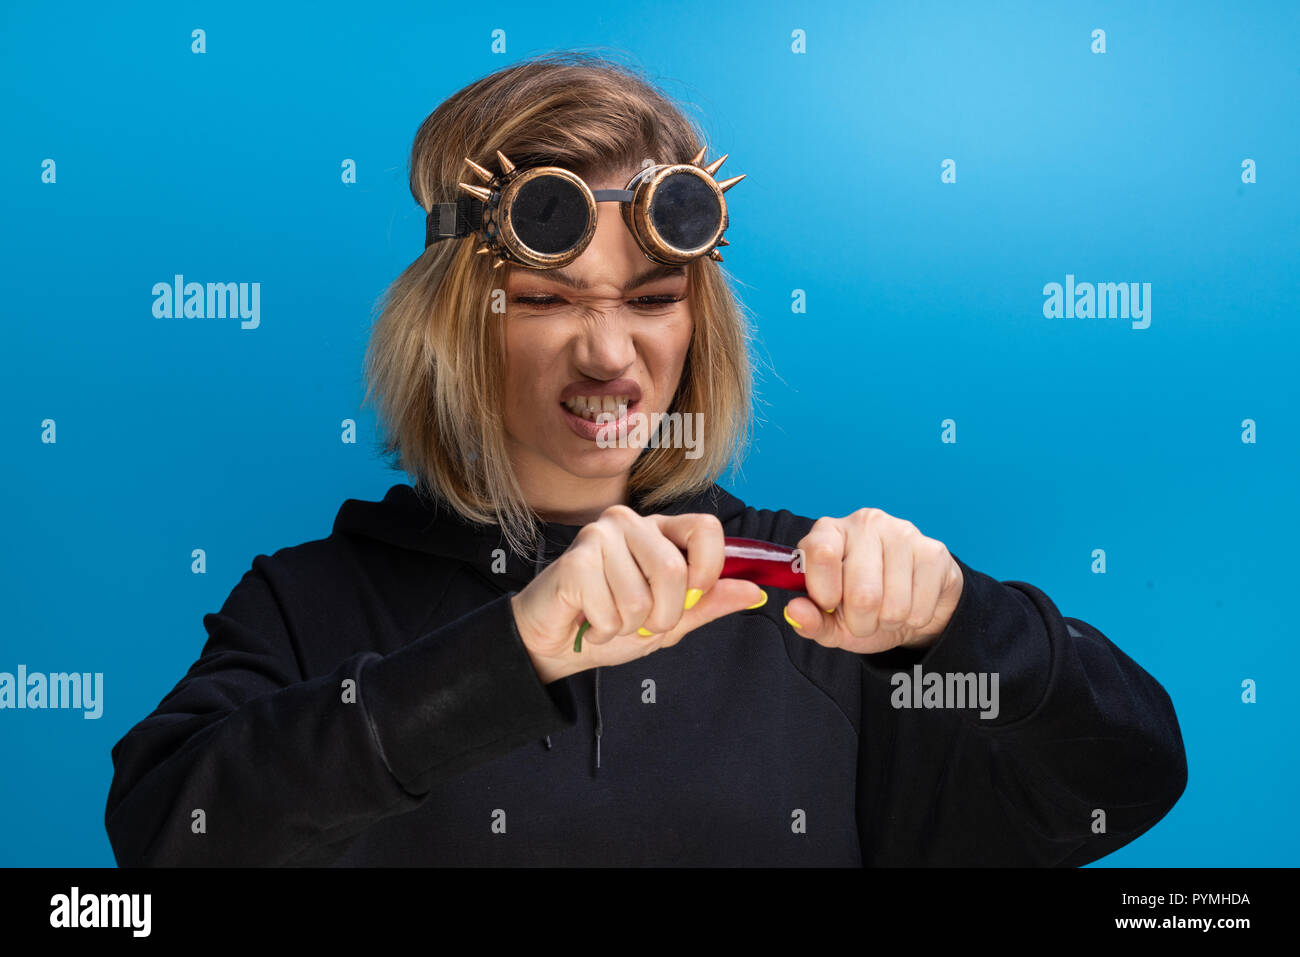 Girl with steam punk glasses tearing a red chilli pepper while looking angry. Portrait shot in studio against blue background Stock Photo